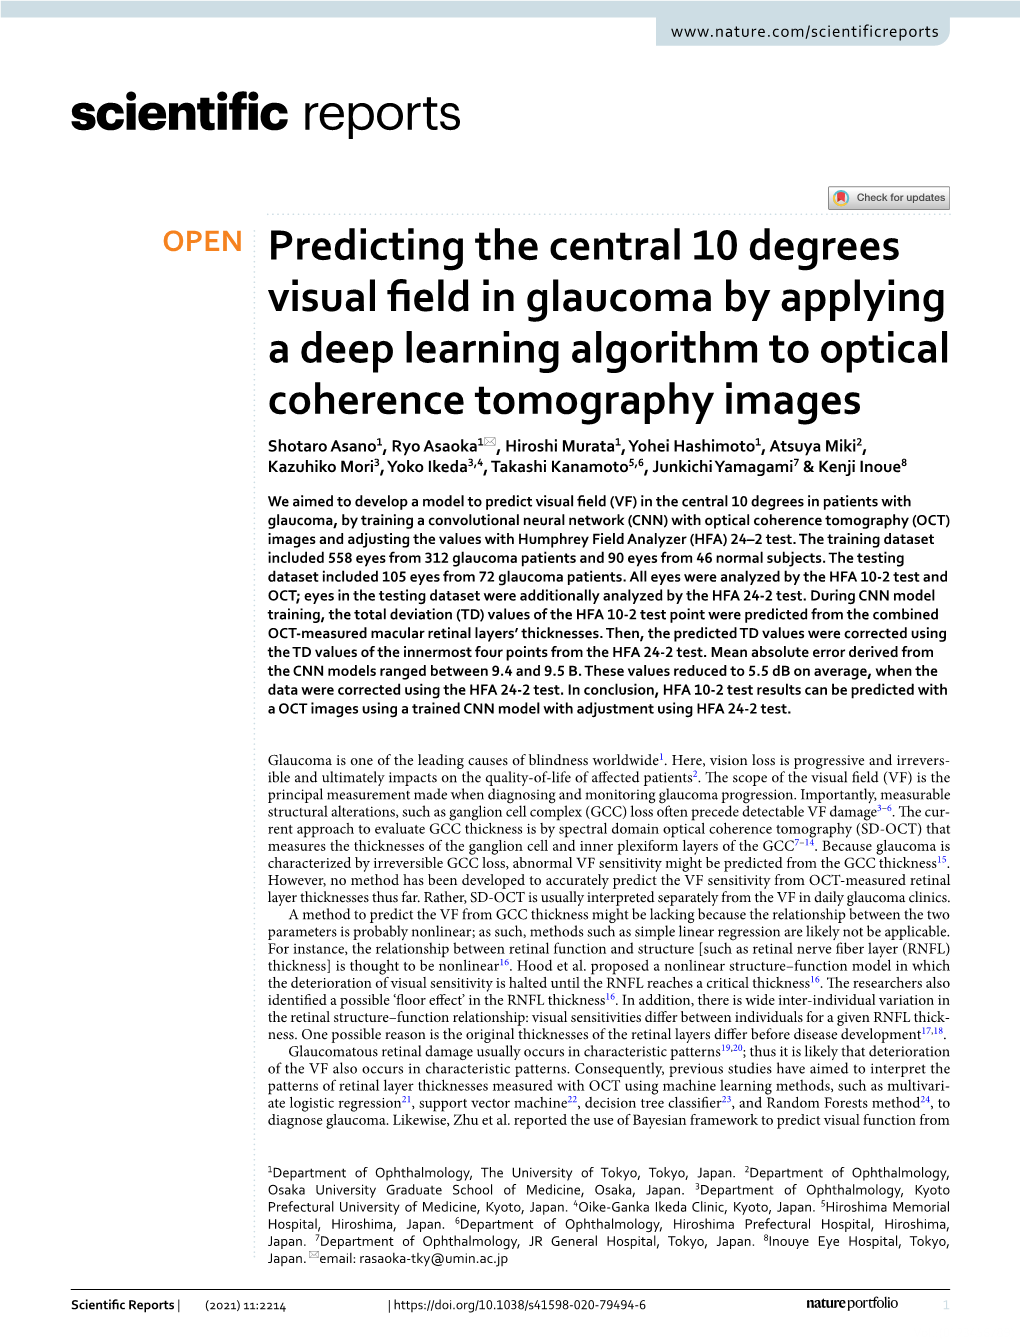 Predicting the Central 10 Degrees Visual Field in Glaucoma By